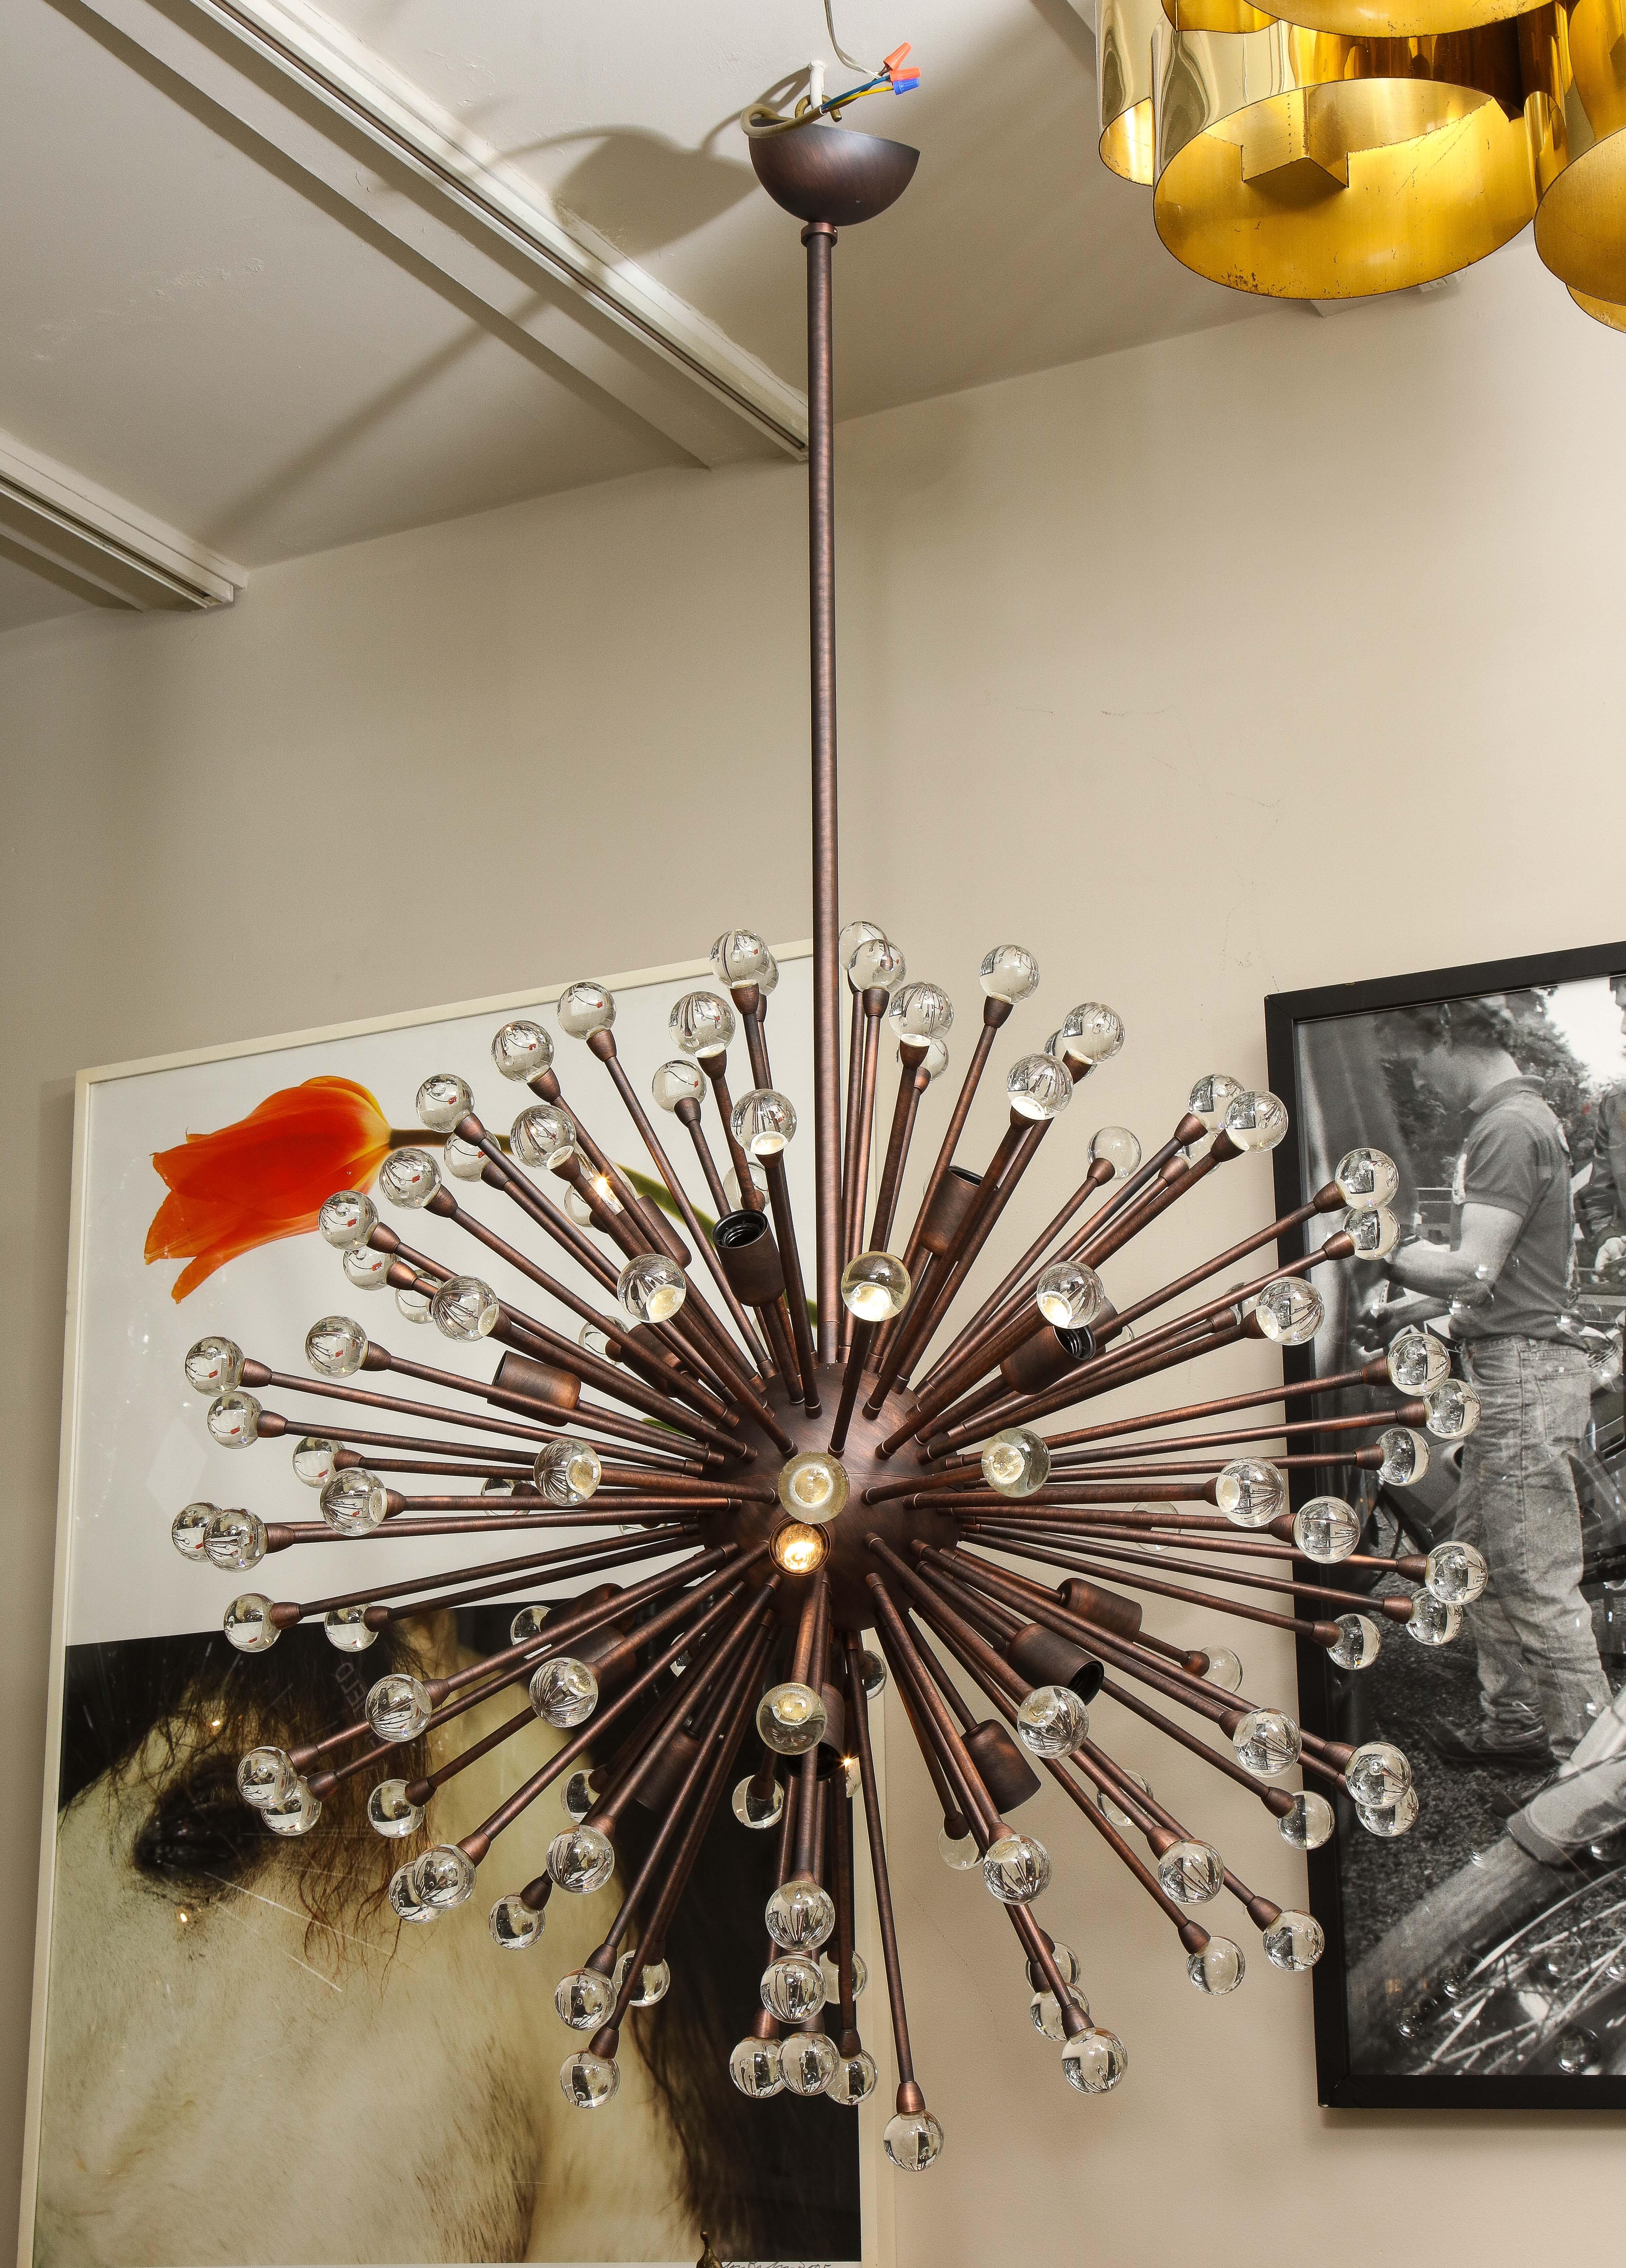 Custom Murano glass ball sputnik chandelier in oil rubbed bronze. The chandelier has 18 standard sockets (E12) to illuminate perfectly round glass ball handmade by the glass artisans in Murano, Italy. Custom orders are available for different sizes